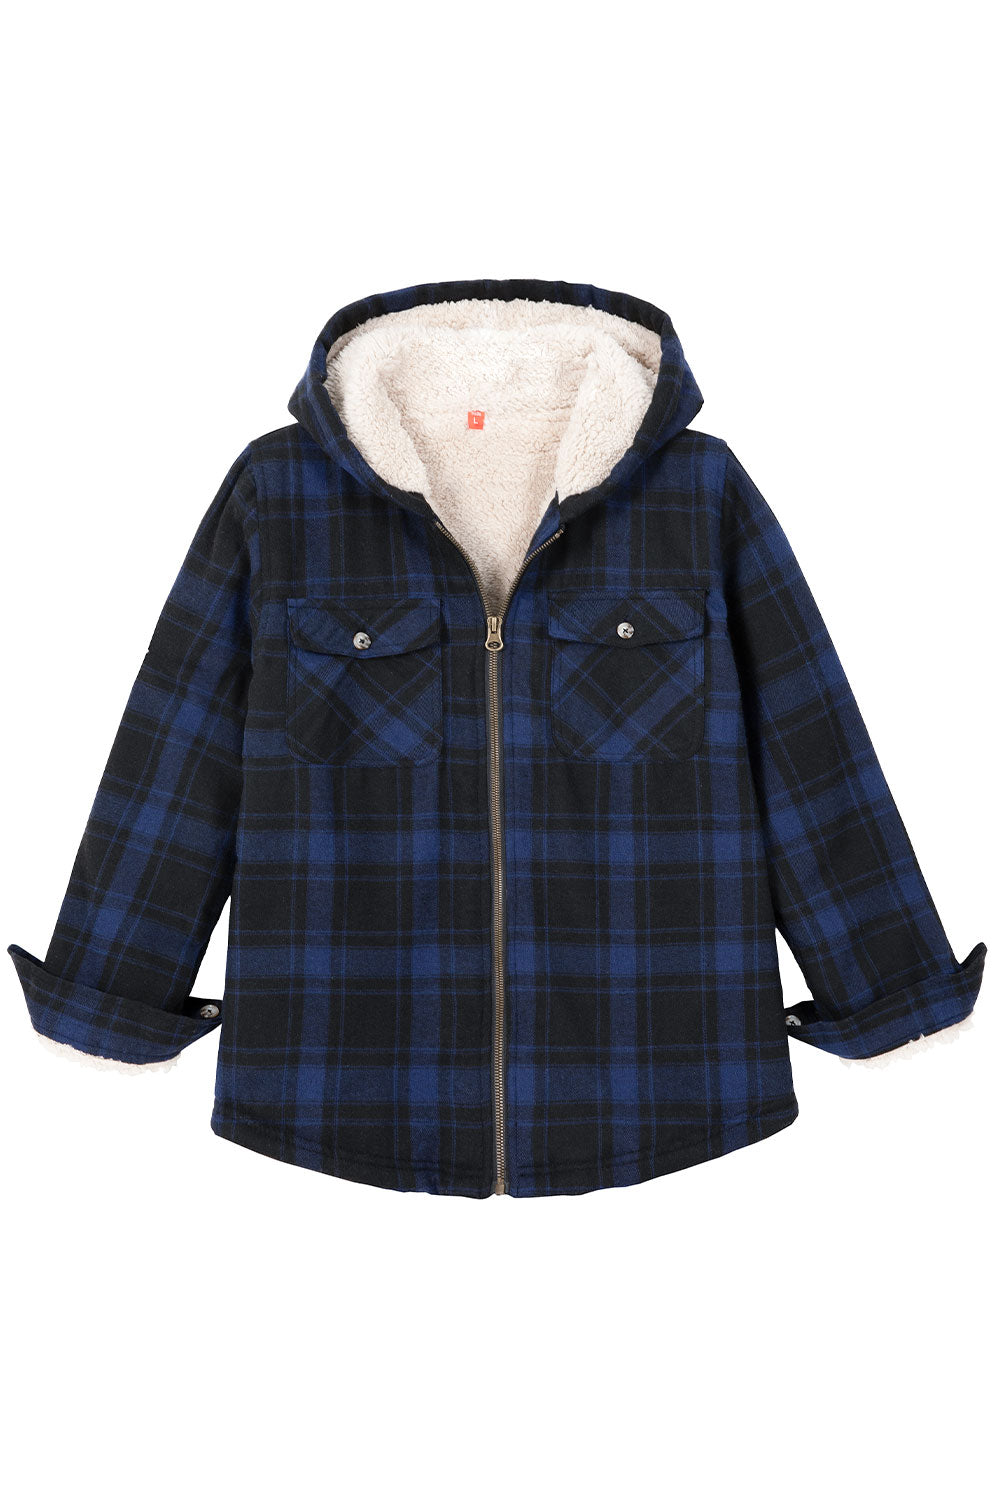 Boys Sherpa Lined Flannel Jacket,Full Zip Up Plaid